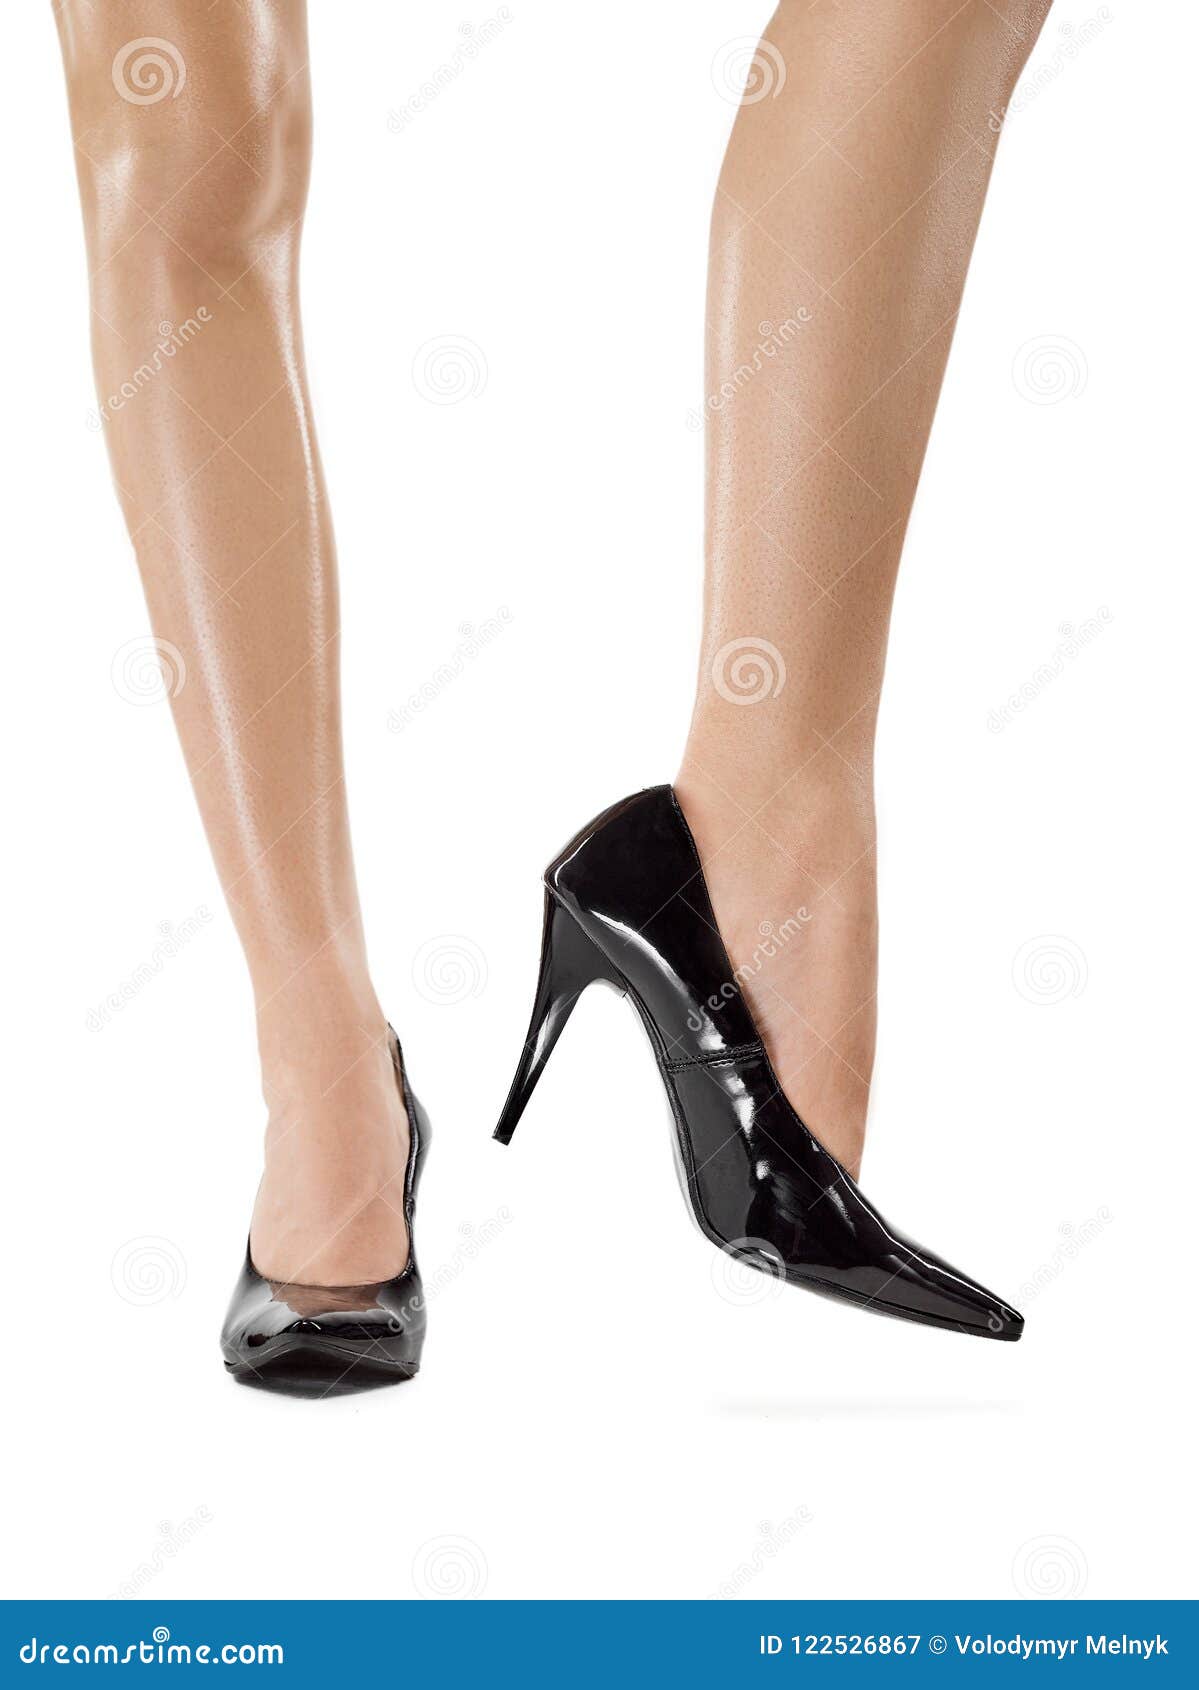 Foot pain woman taking off shoes after work day tired coming home removing  high heels relaxing in sofa for the weekend. Luxury hotel room relax  getaway. Feet health problem businesswoman Stock Photo